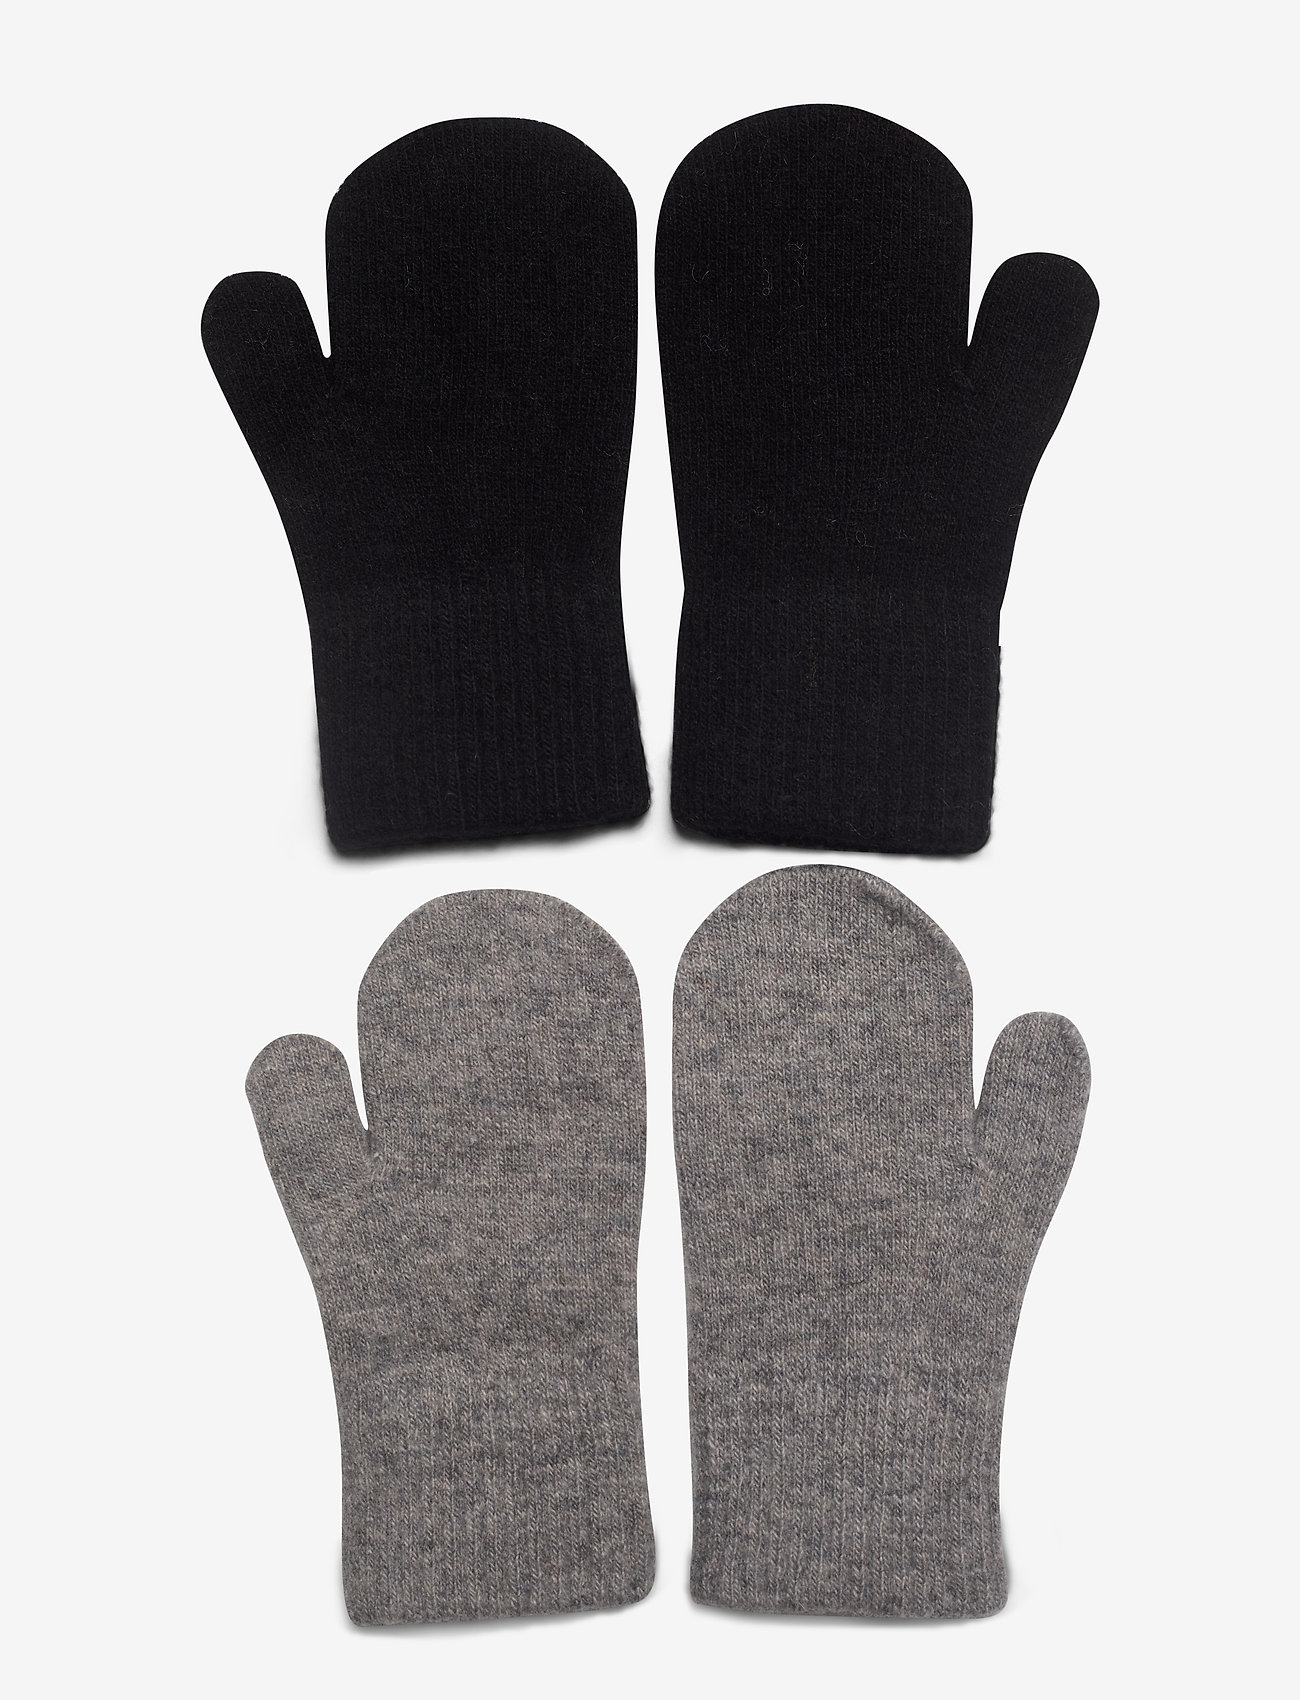 CeLaVi - Magic Mittens 2-pack - lowest prices - grey - 1